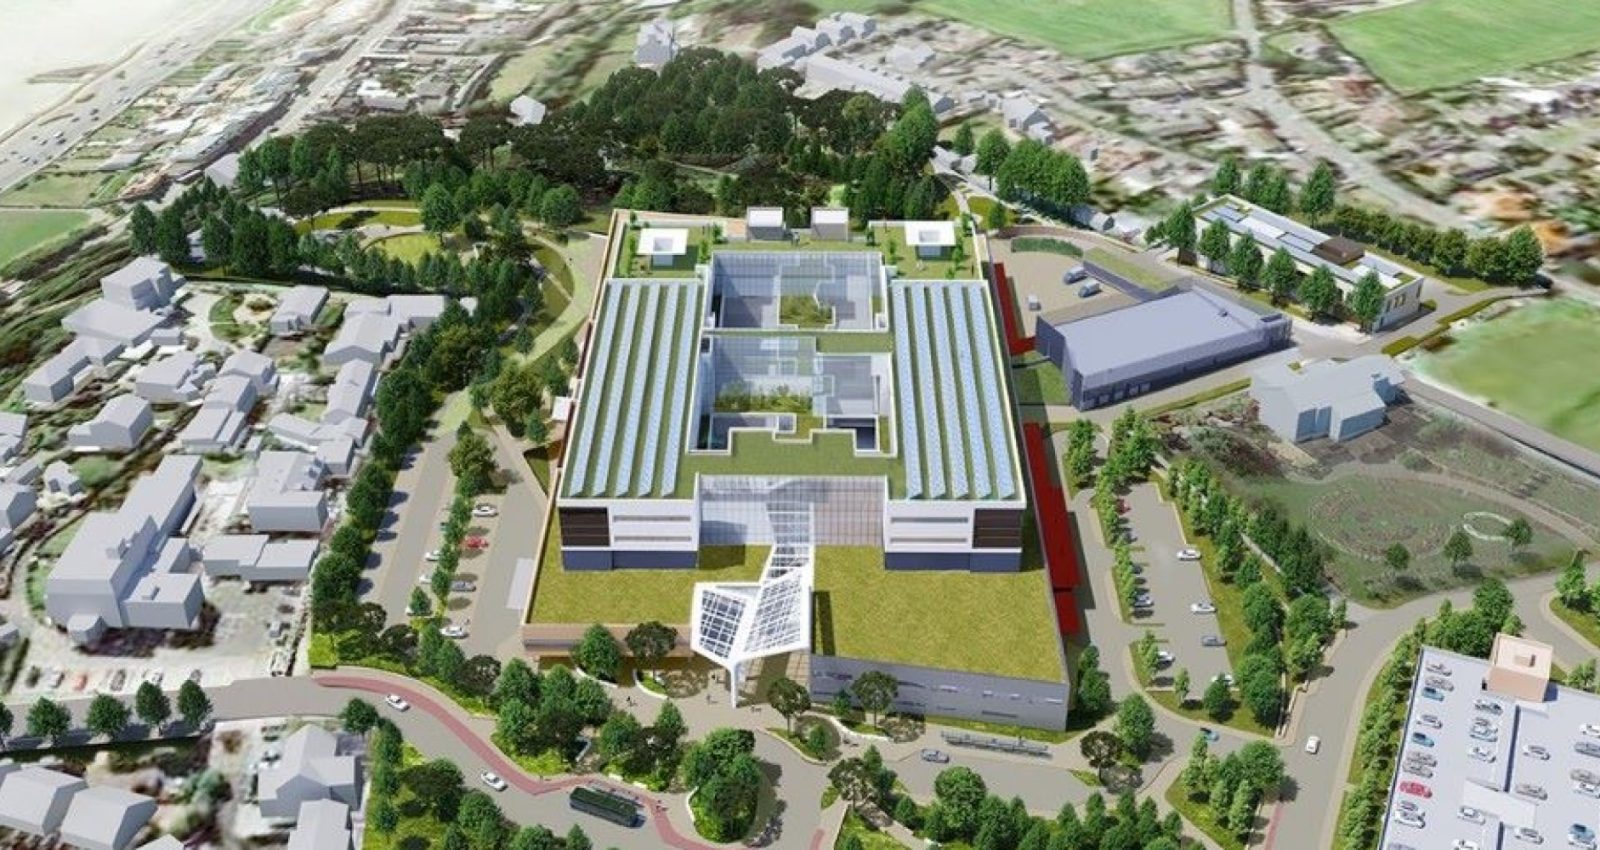 Site visual from above of Future Hospital, St Helier, Jersey